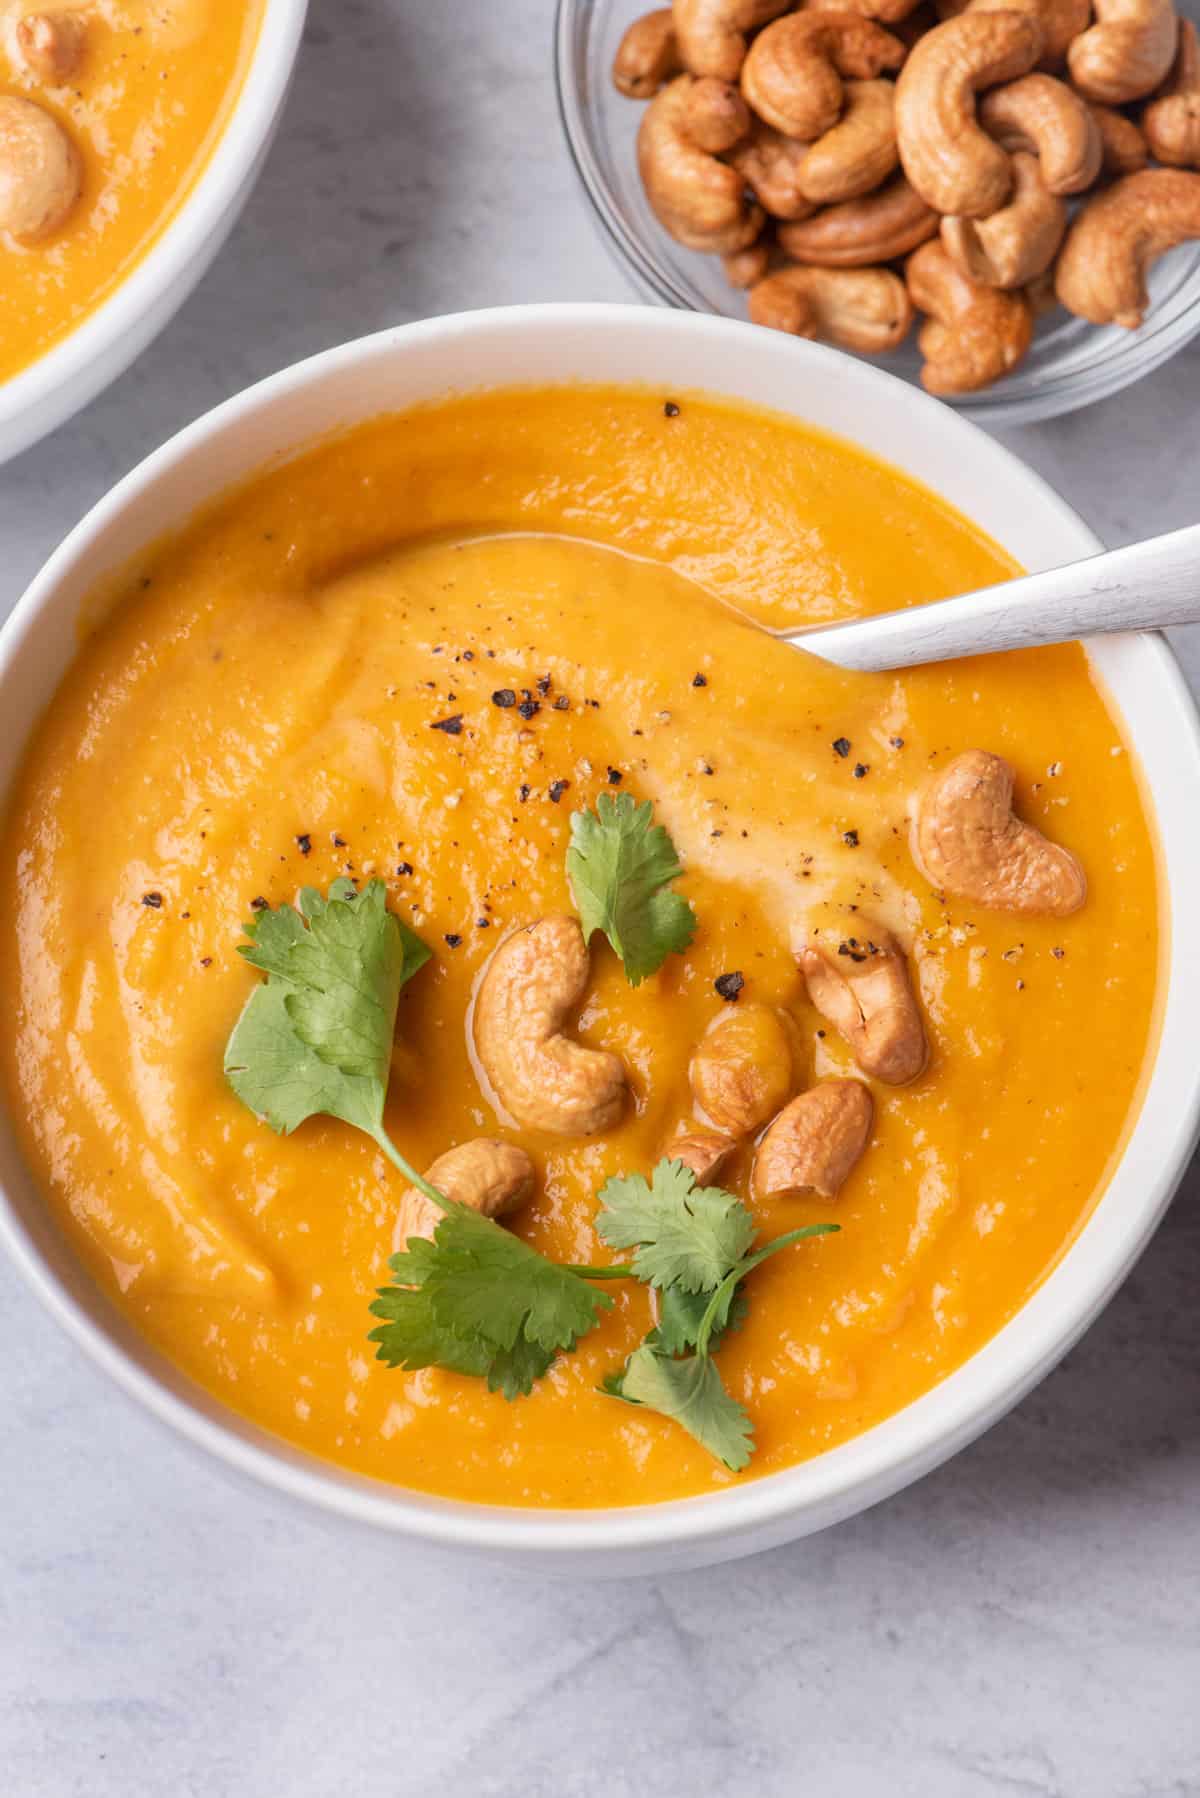 Spoon scooping bite of sweet potato soup garnished with cashews and cilantro